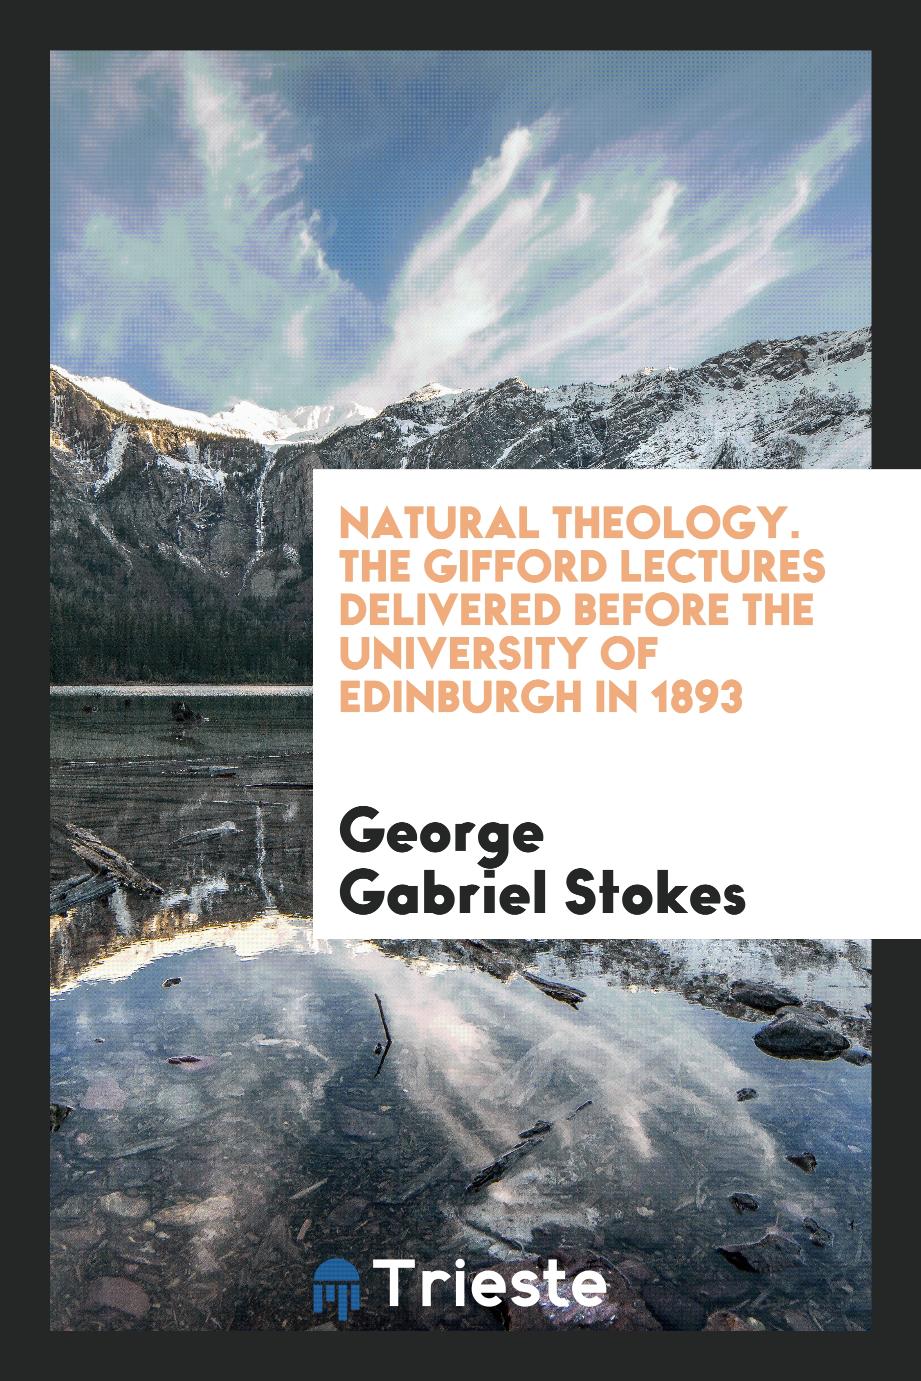 Natural Theology. The Gifford Lectures Delivered before the University of Edinburgh in 1893